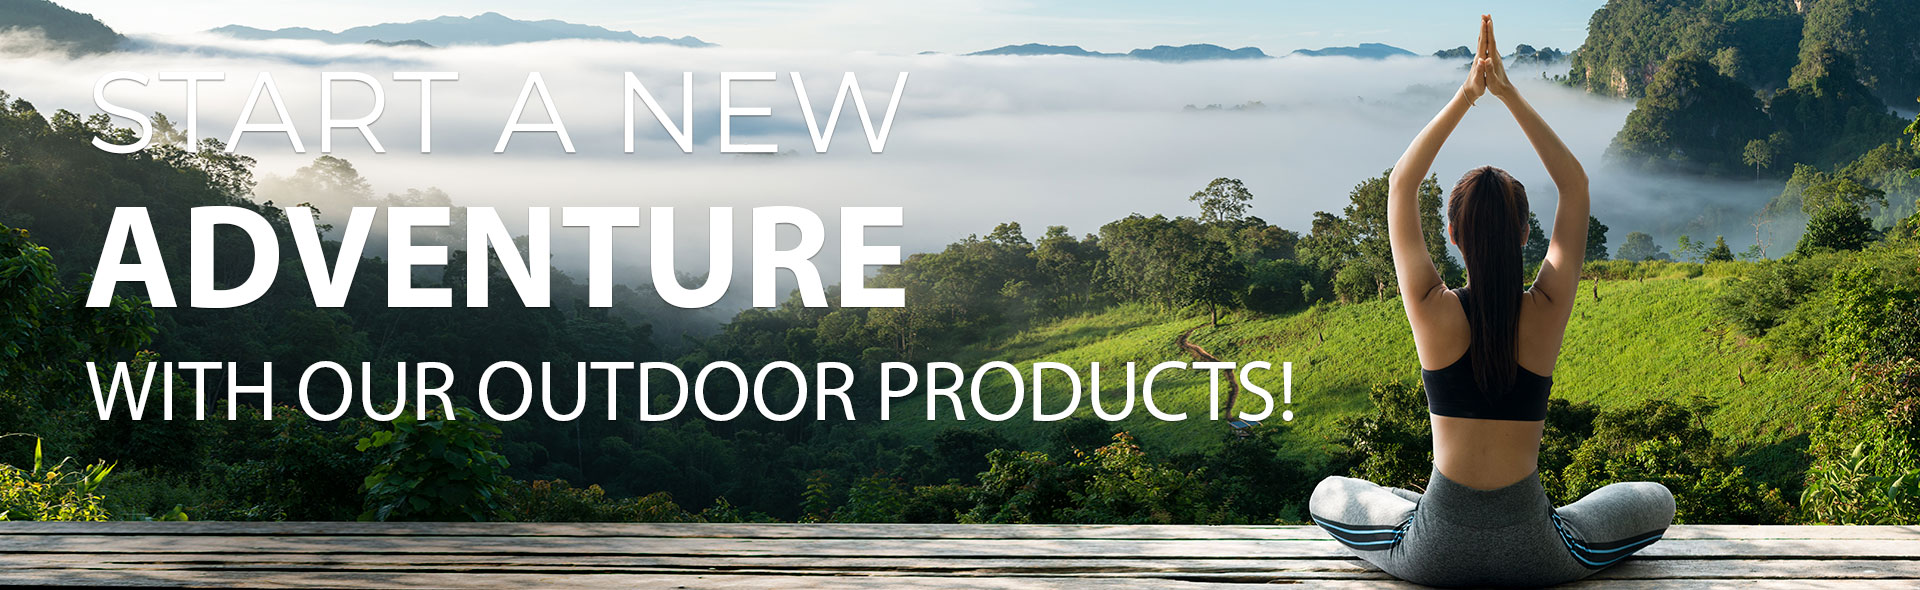 Start a new adventure with our outdoor products!